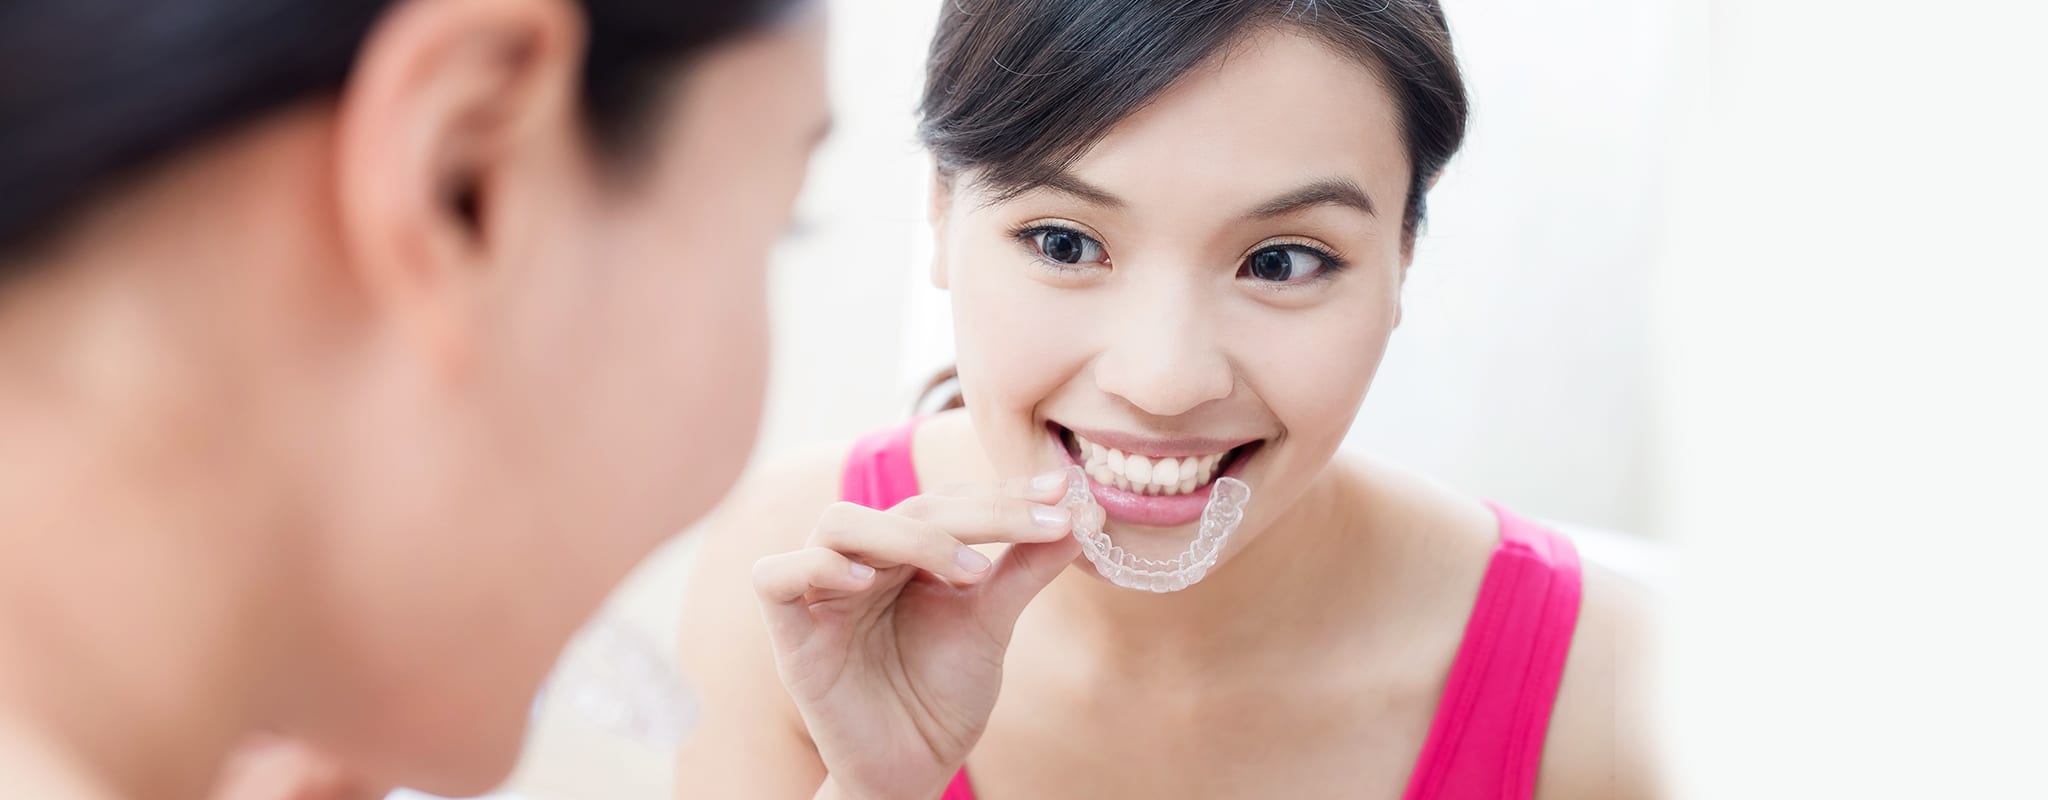 Fixed Vs. Removable Retainers—Which is right for you?